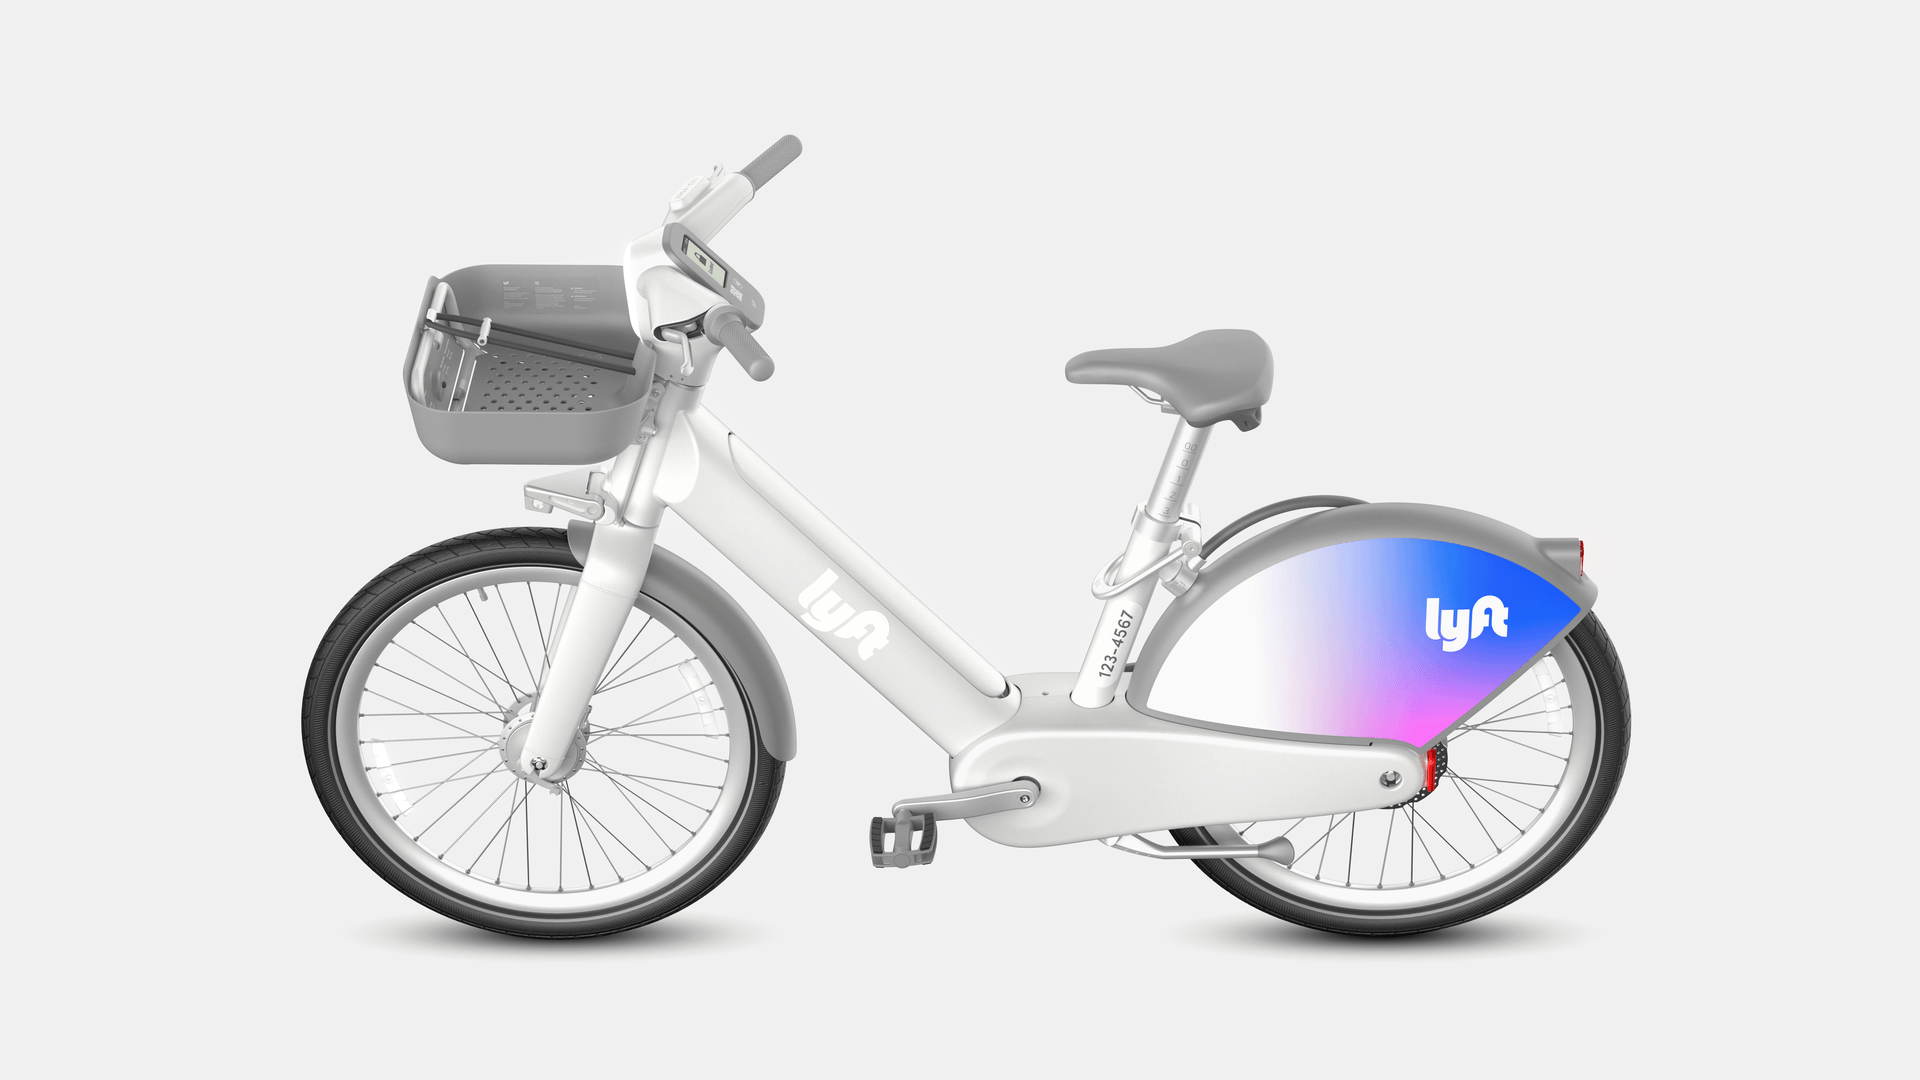 The new Lyft ebike features paint that reflects car headlights in much the same way as street signs